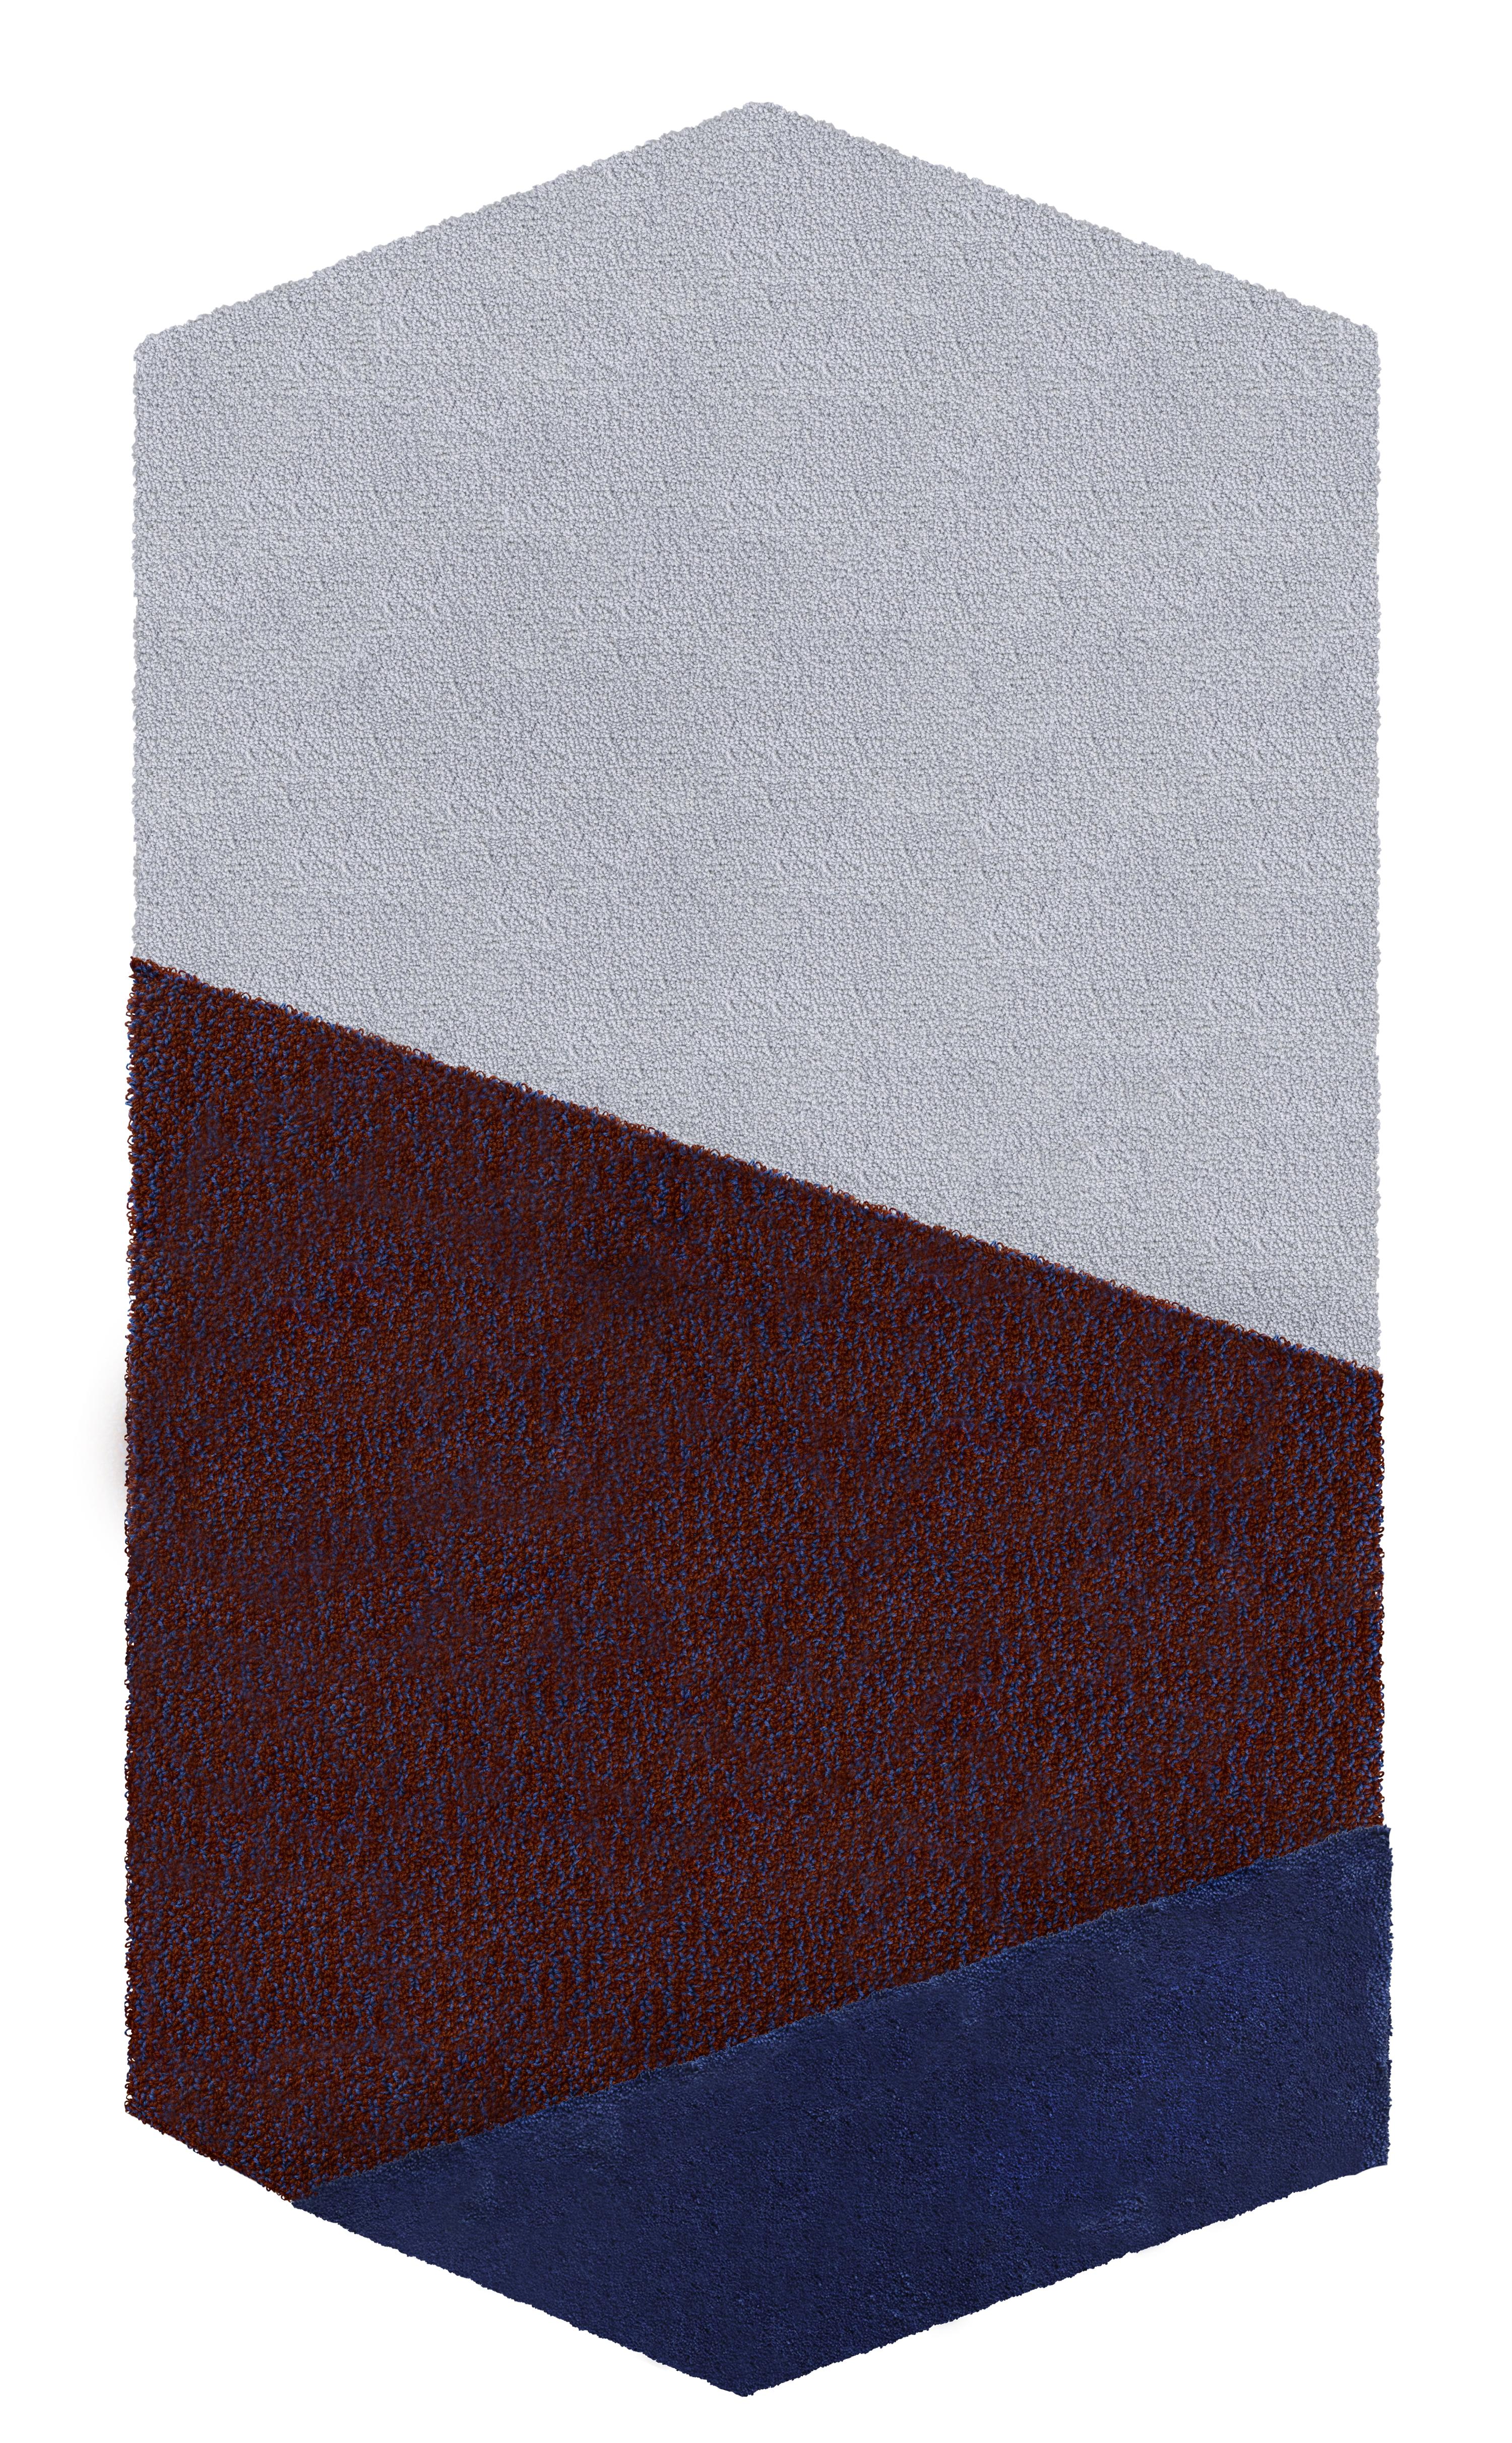 Blue left Oci rug by Seraina Lareida
Dimensions: W 70 x H 130 cm 
Materials: 100% New Zeland top-quality wool.
Available in sizes Medium (110x200cm) and Large (150 x 280cm). Also available in colors: Yellow/Gray, Brick/Pink, Bordeaux/Ecru and,